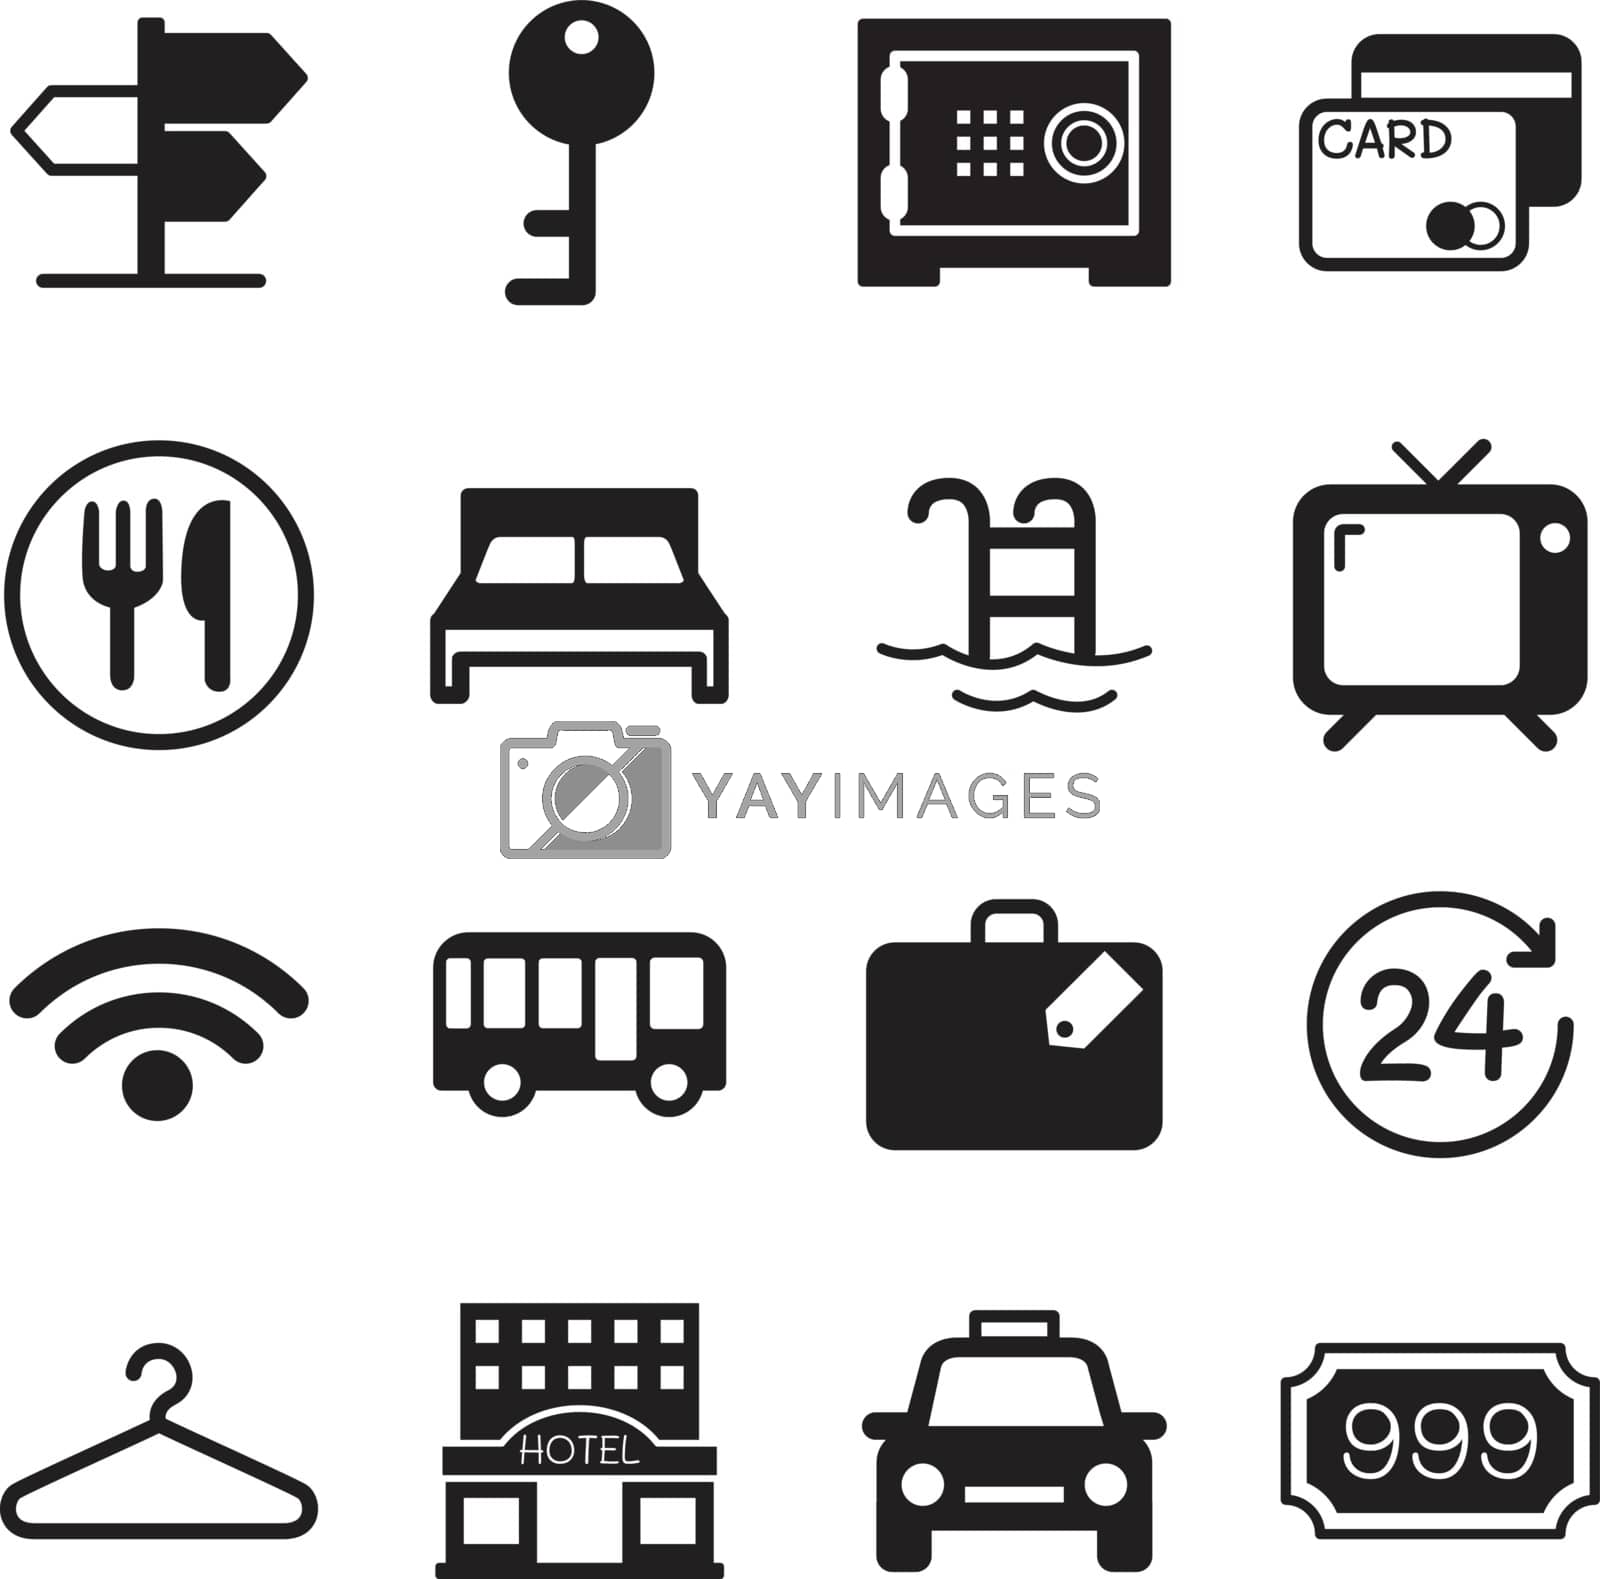 Royalty free image of Hotel & hostel icons set by Puckung